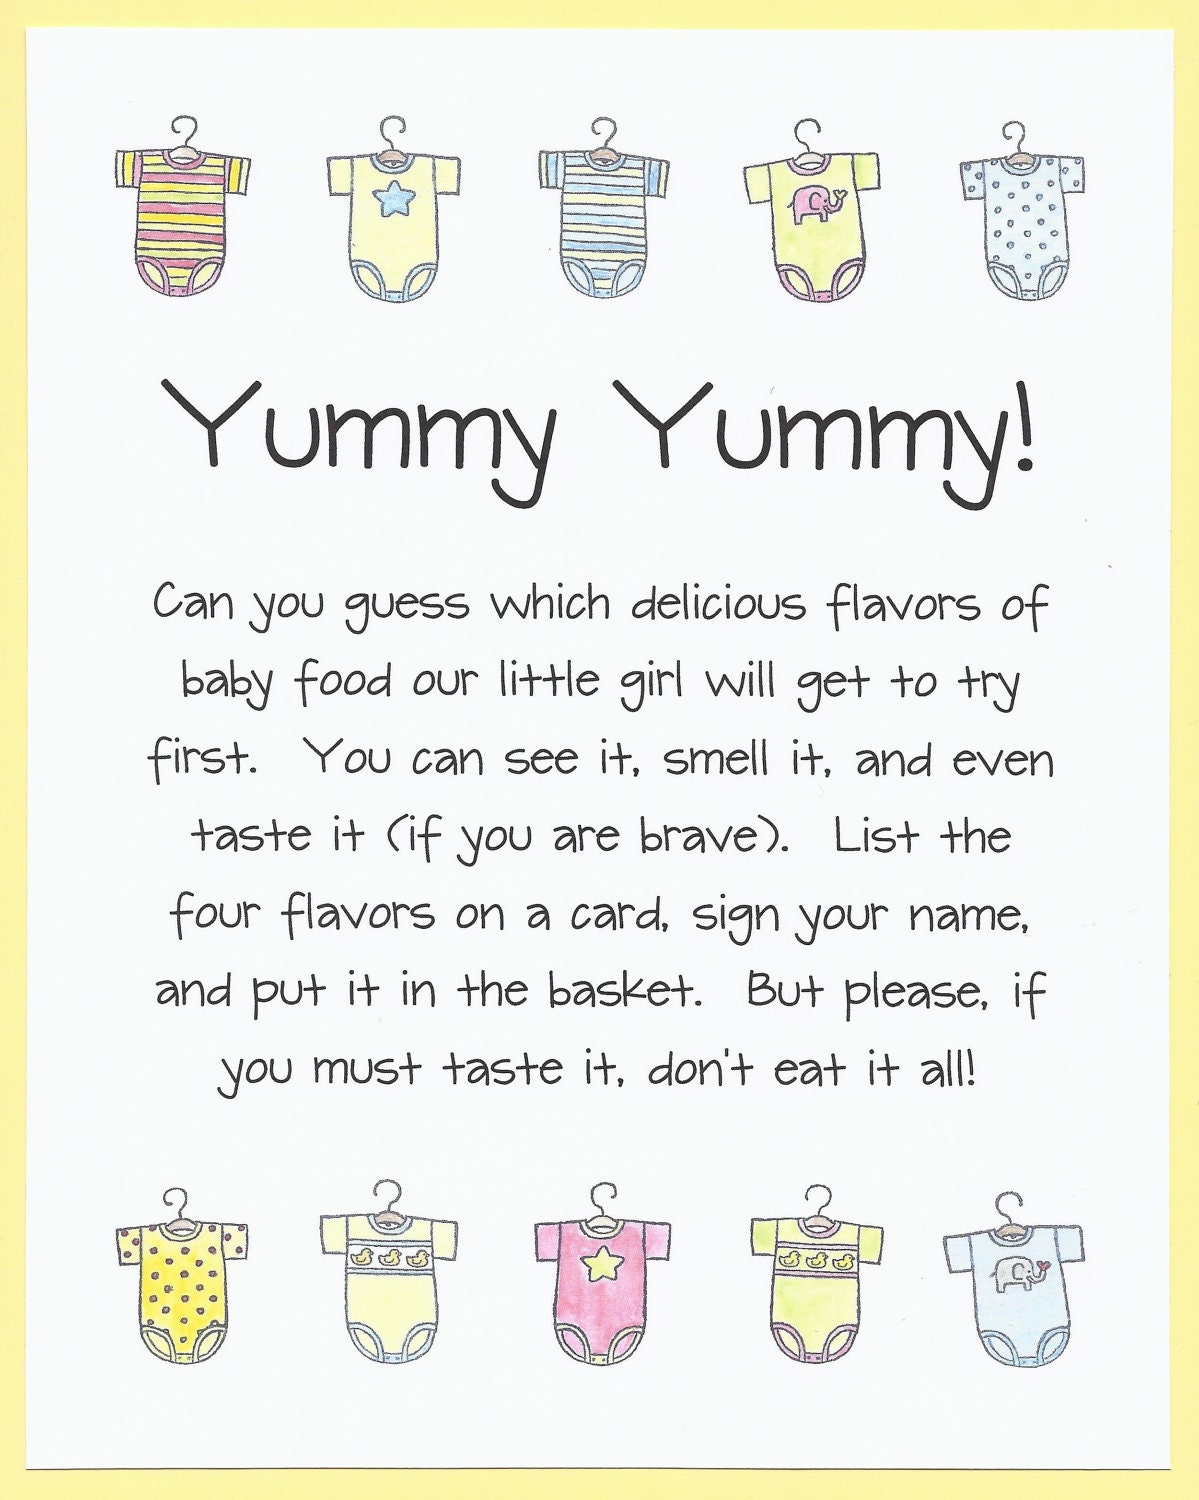 264 New baby shower game ideas on pinterest 350 Yummy Yummy Baby Food Shower Game Onesie Baby by CardsByKooper 